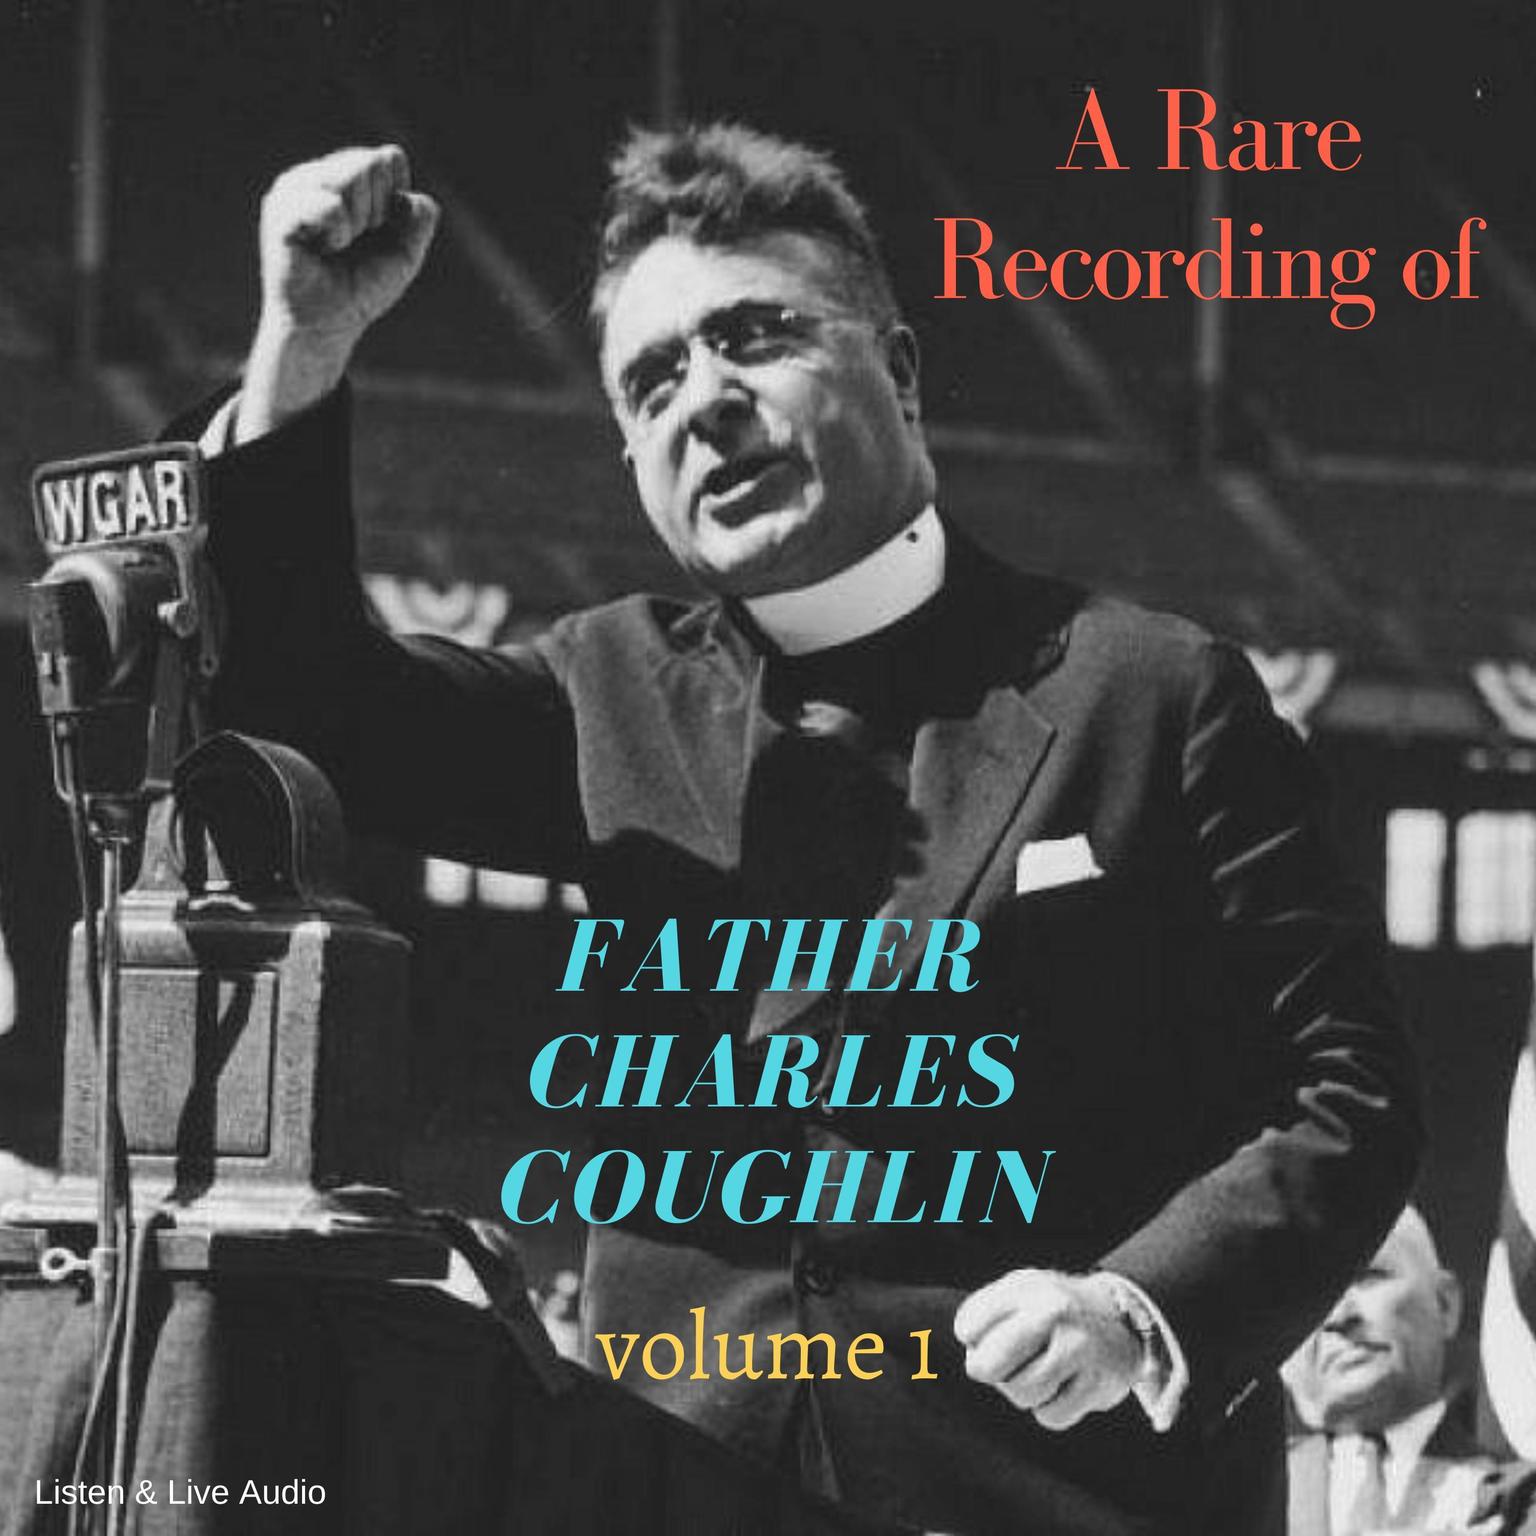 A Rare Recording of Father Charles Coughlin - Vol. 1 Audiobook, by Father Charles Coughlin